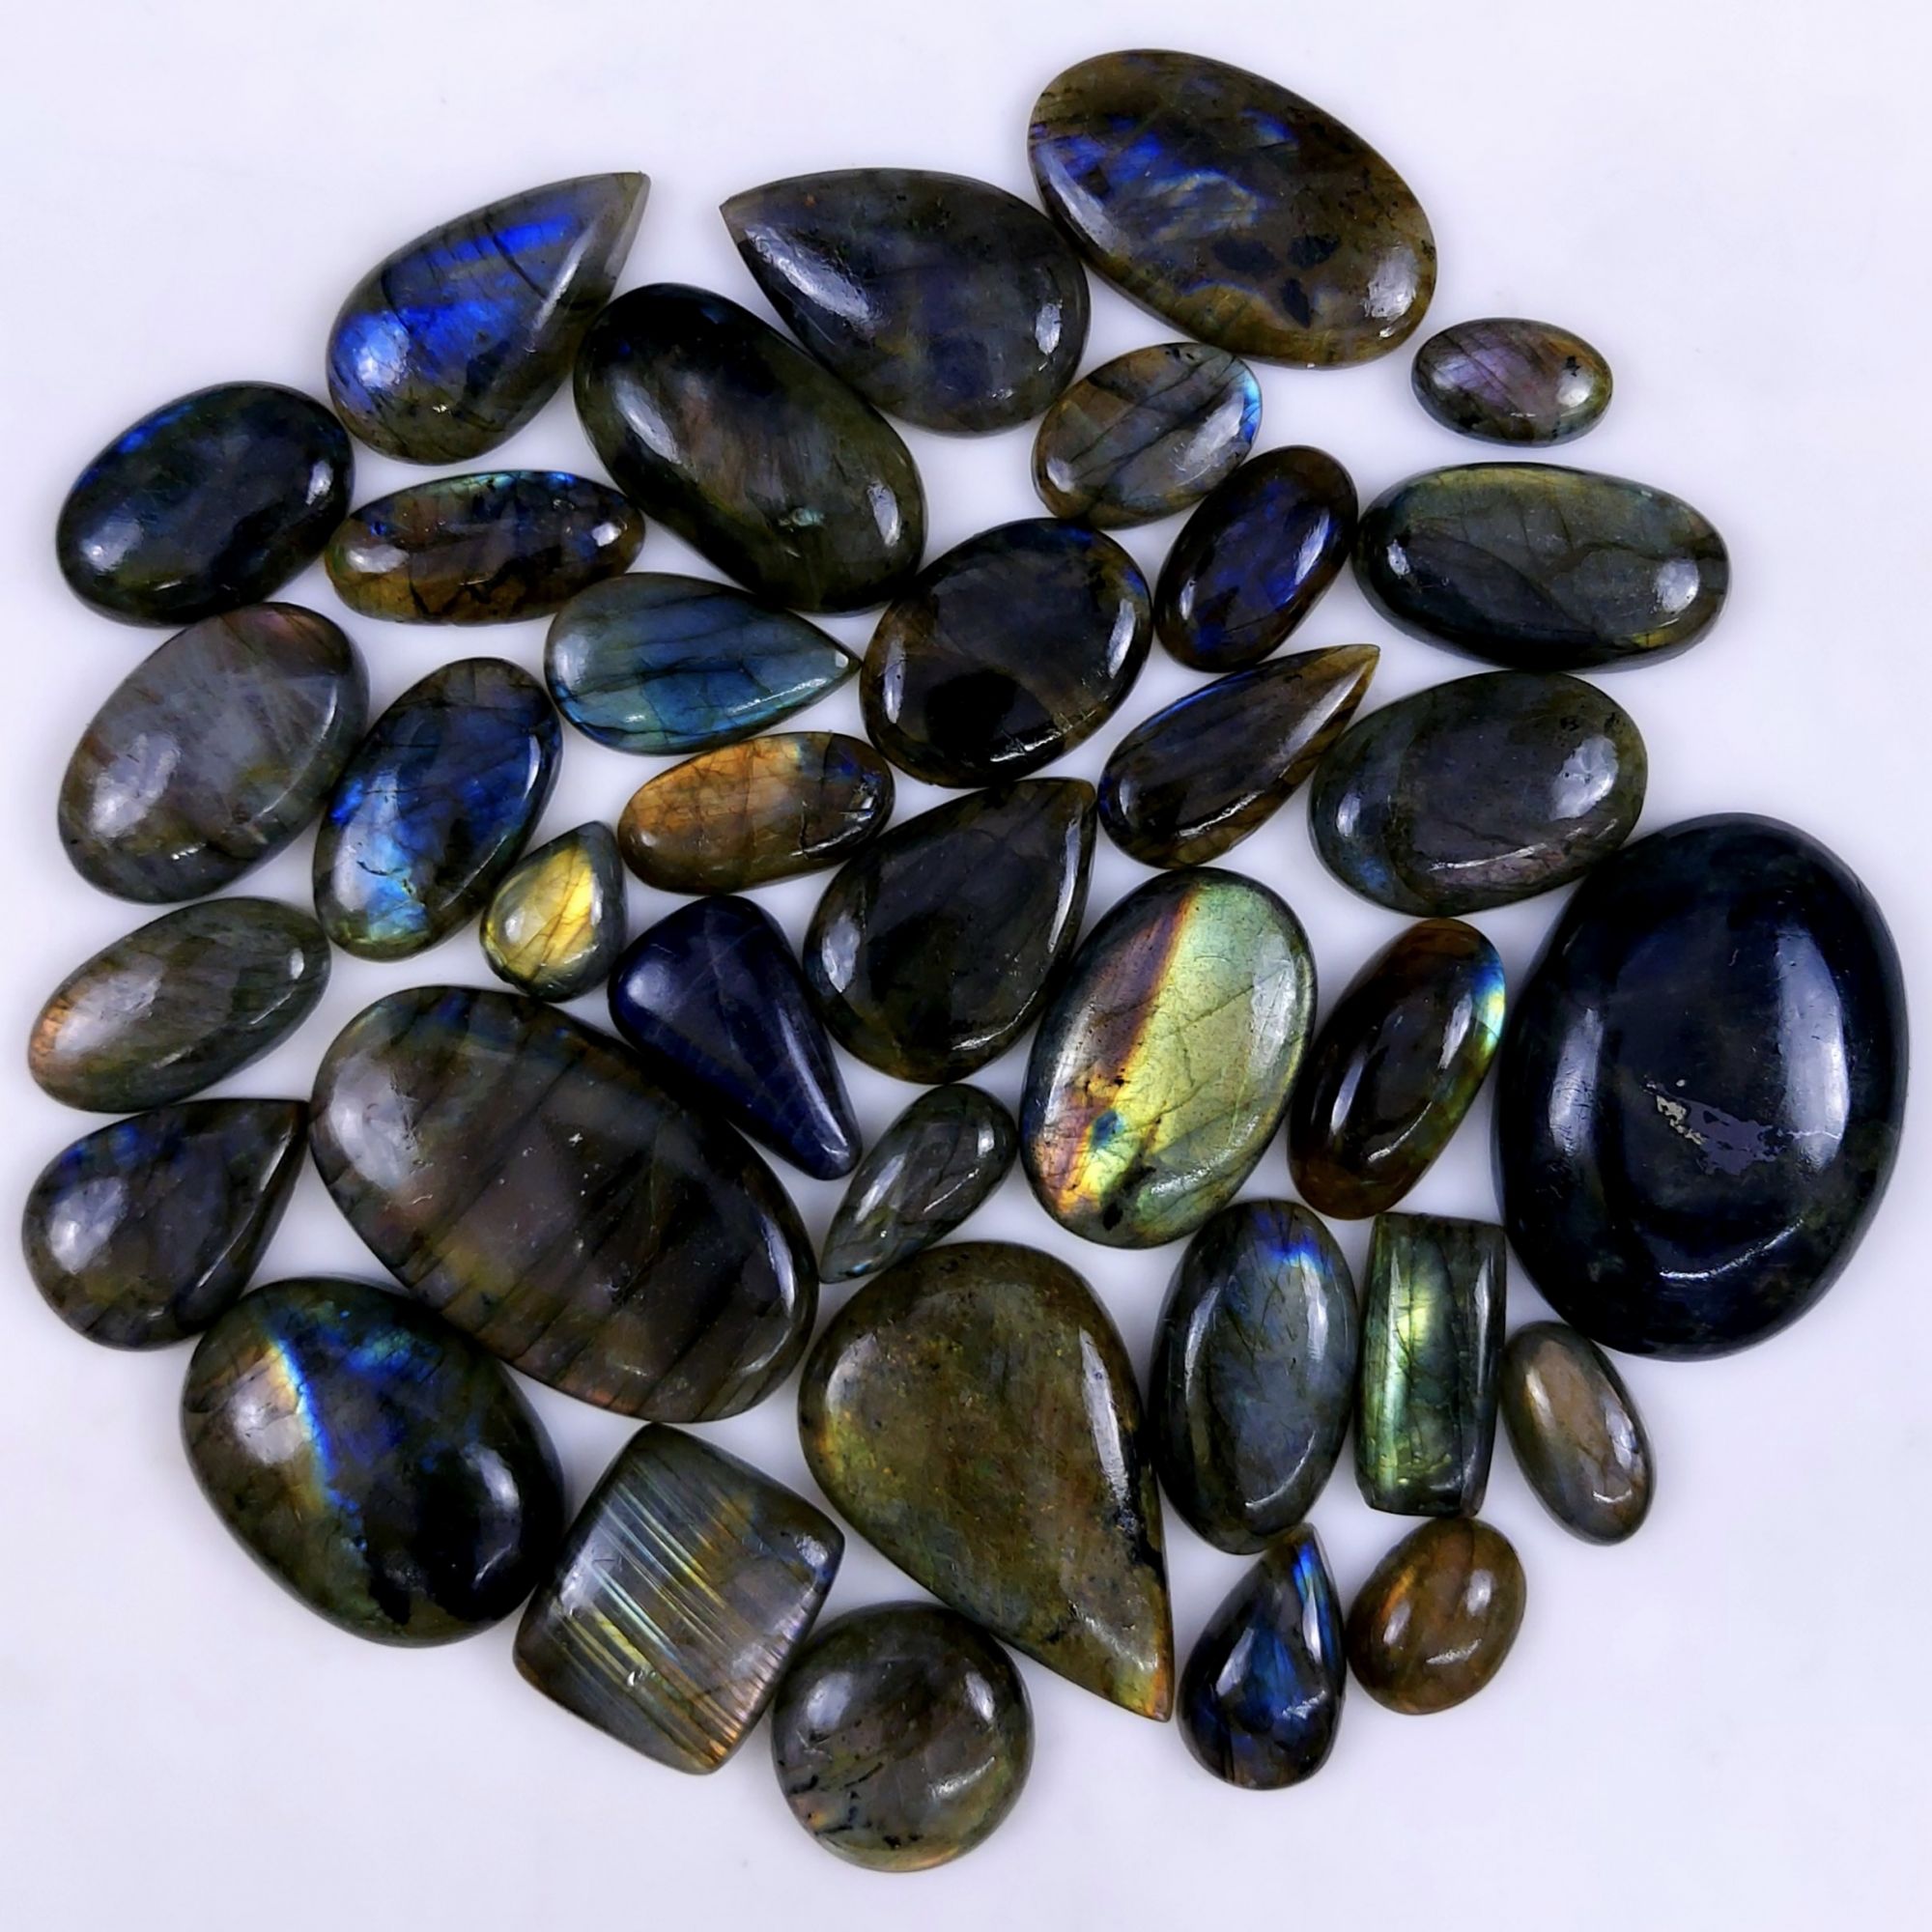 36pc 1595Cts Labradorite Cabochon Multifire Healing Crystal For Jewelry Supplies, Labradorite Necklace Handmade Wire Wrapped Gemstone Pendant 52x32 16x12mm#6312